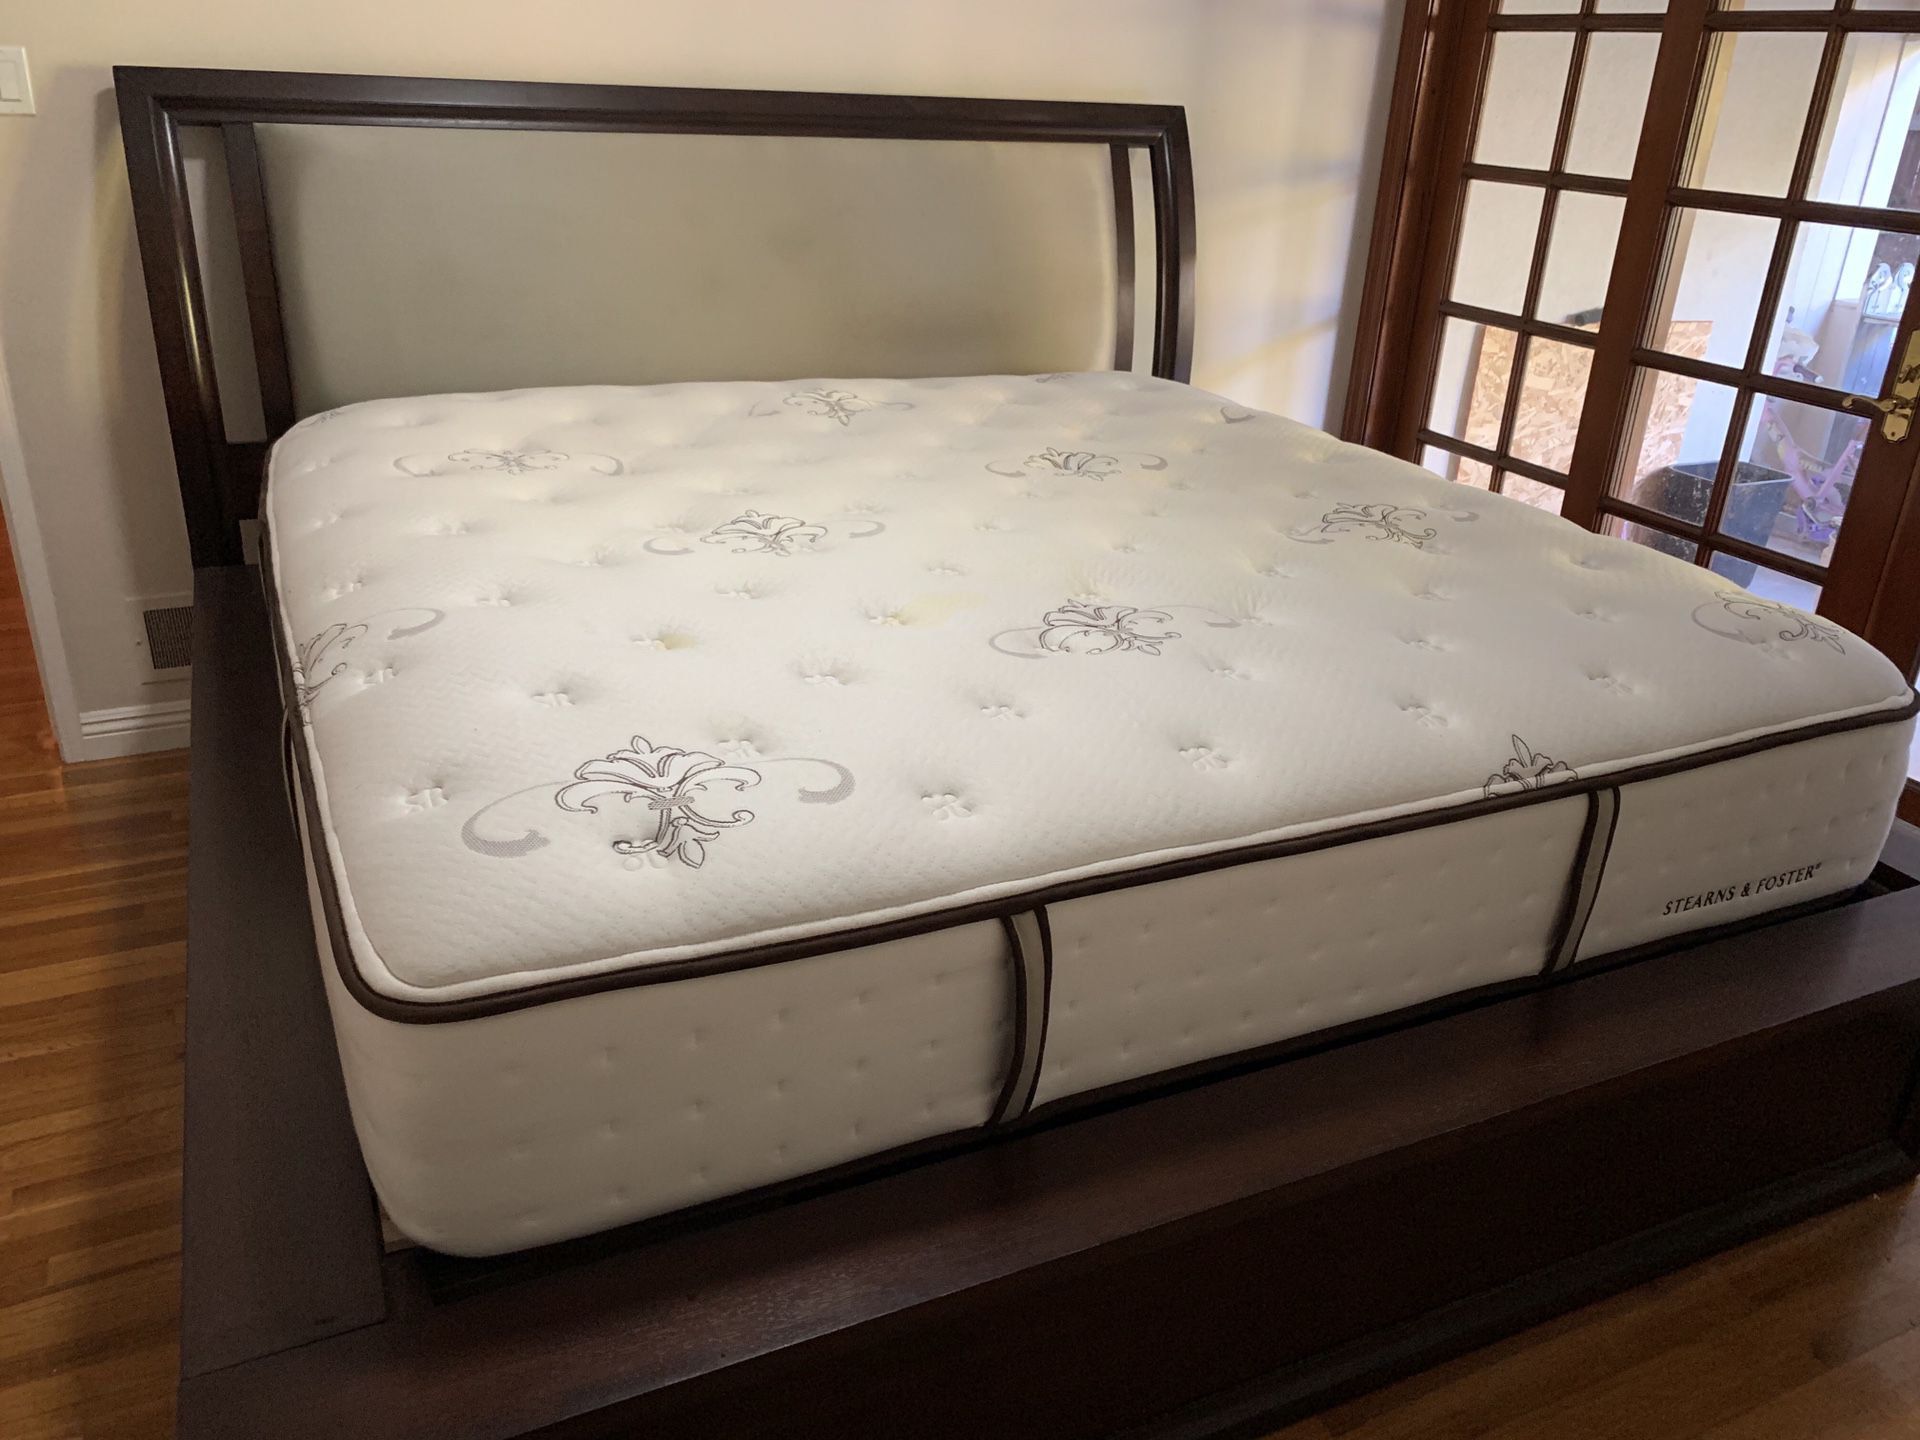 stearns and foster king size ella grace mattress